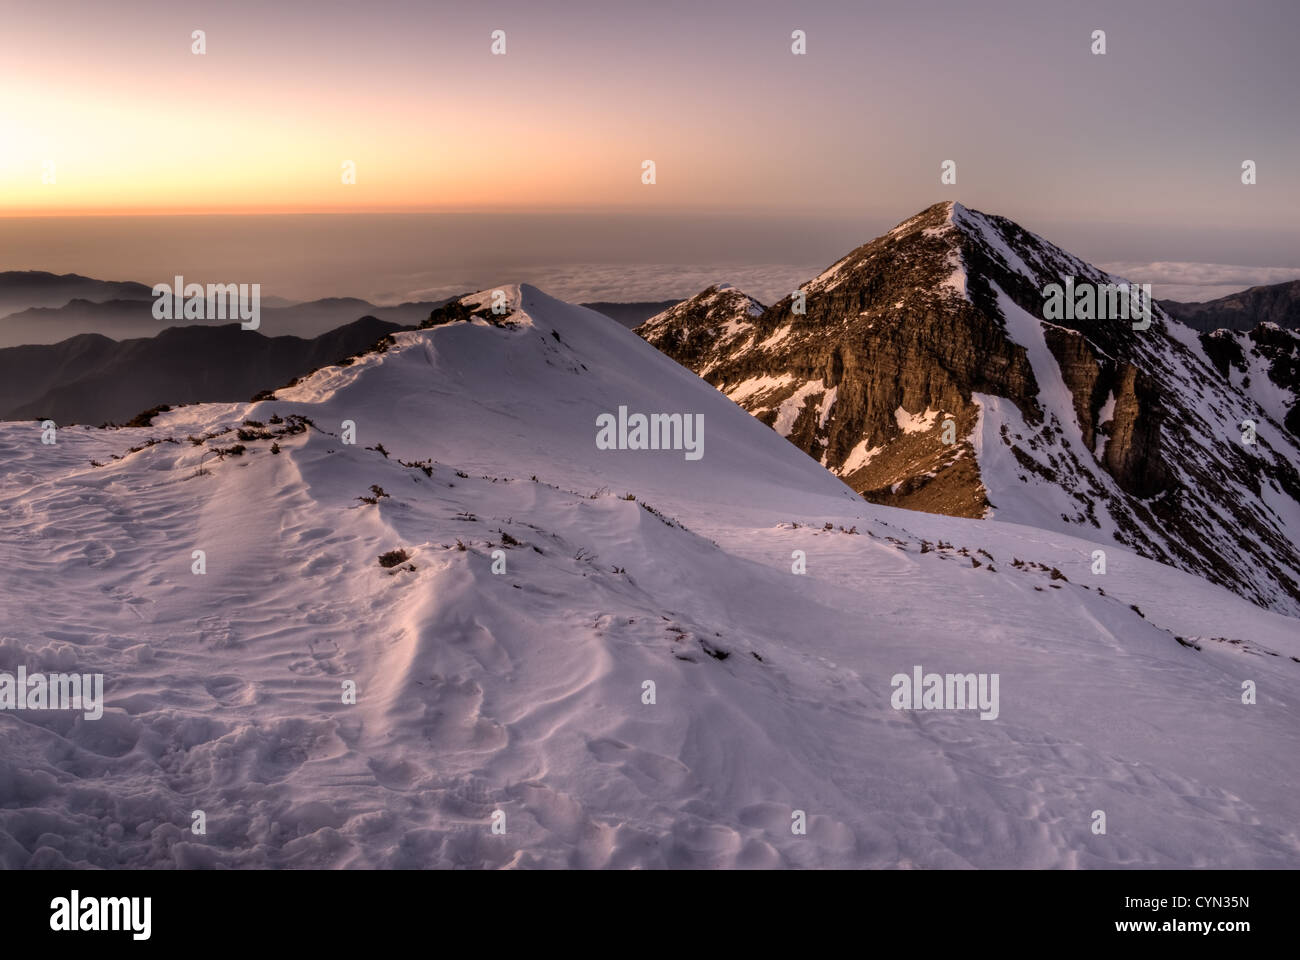 Mountain scenery with snow slop and dramatic peak in dusk sunset evening. Stock Photo